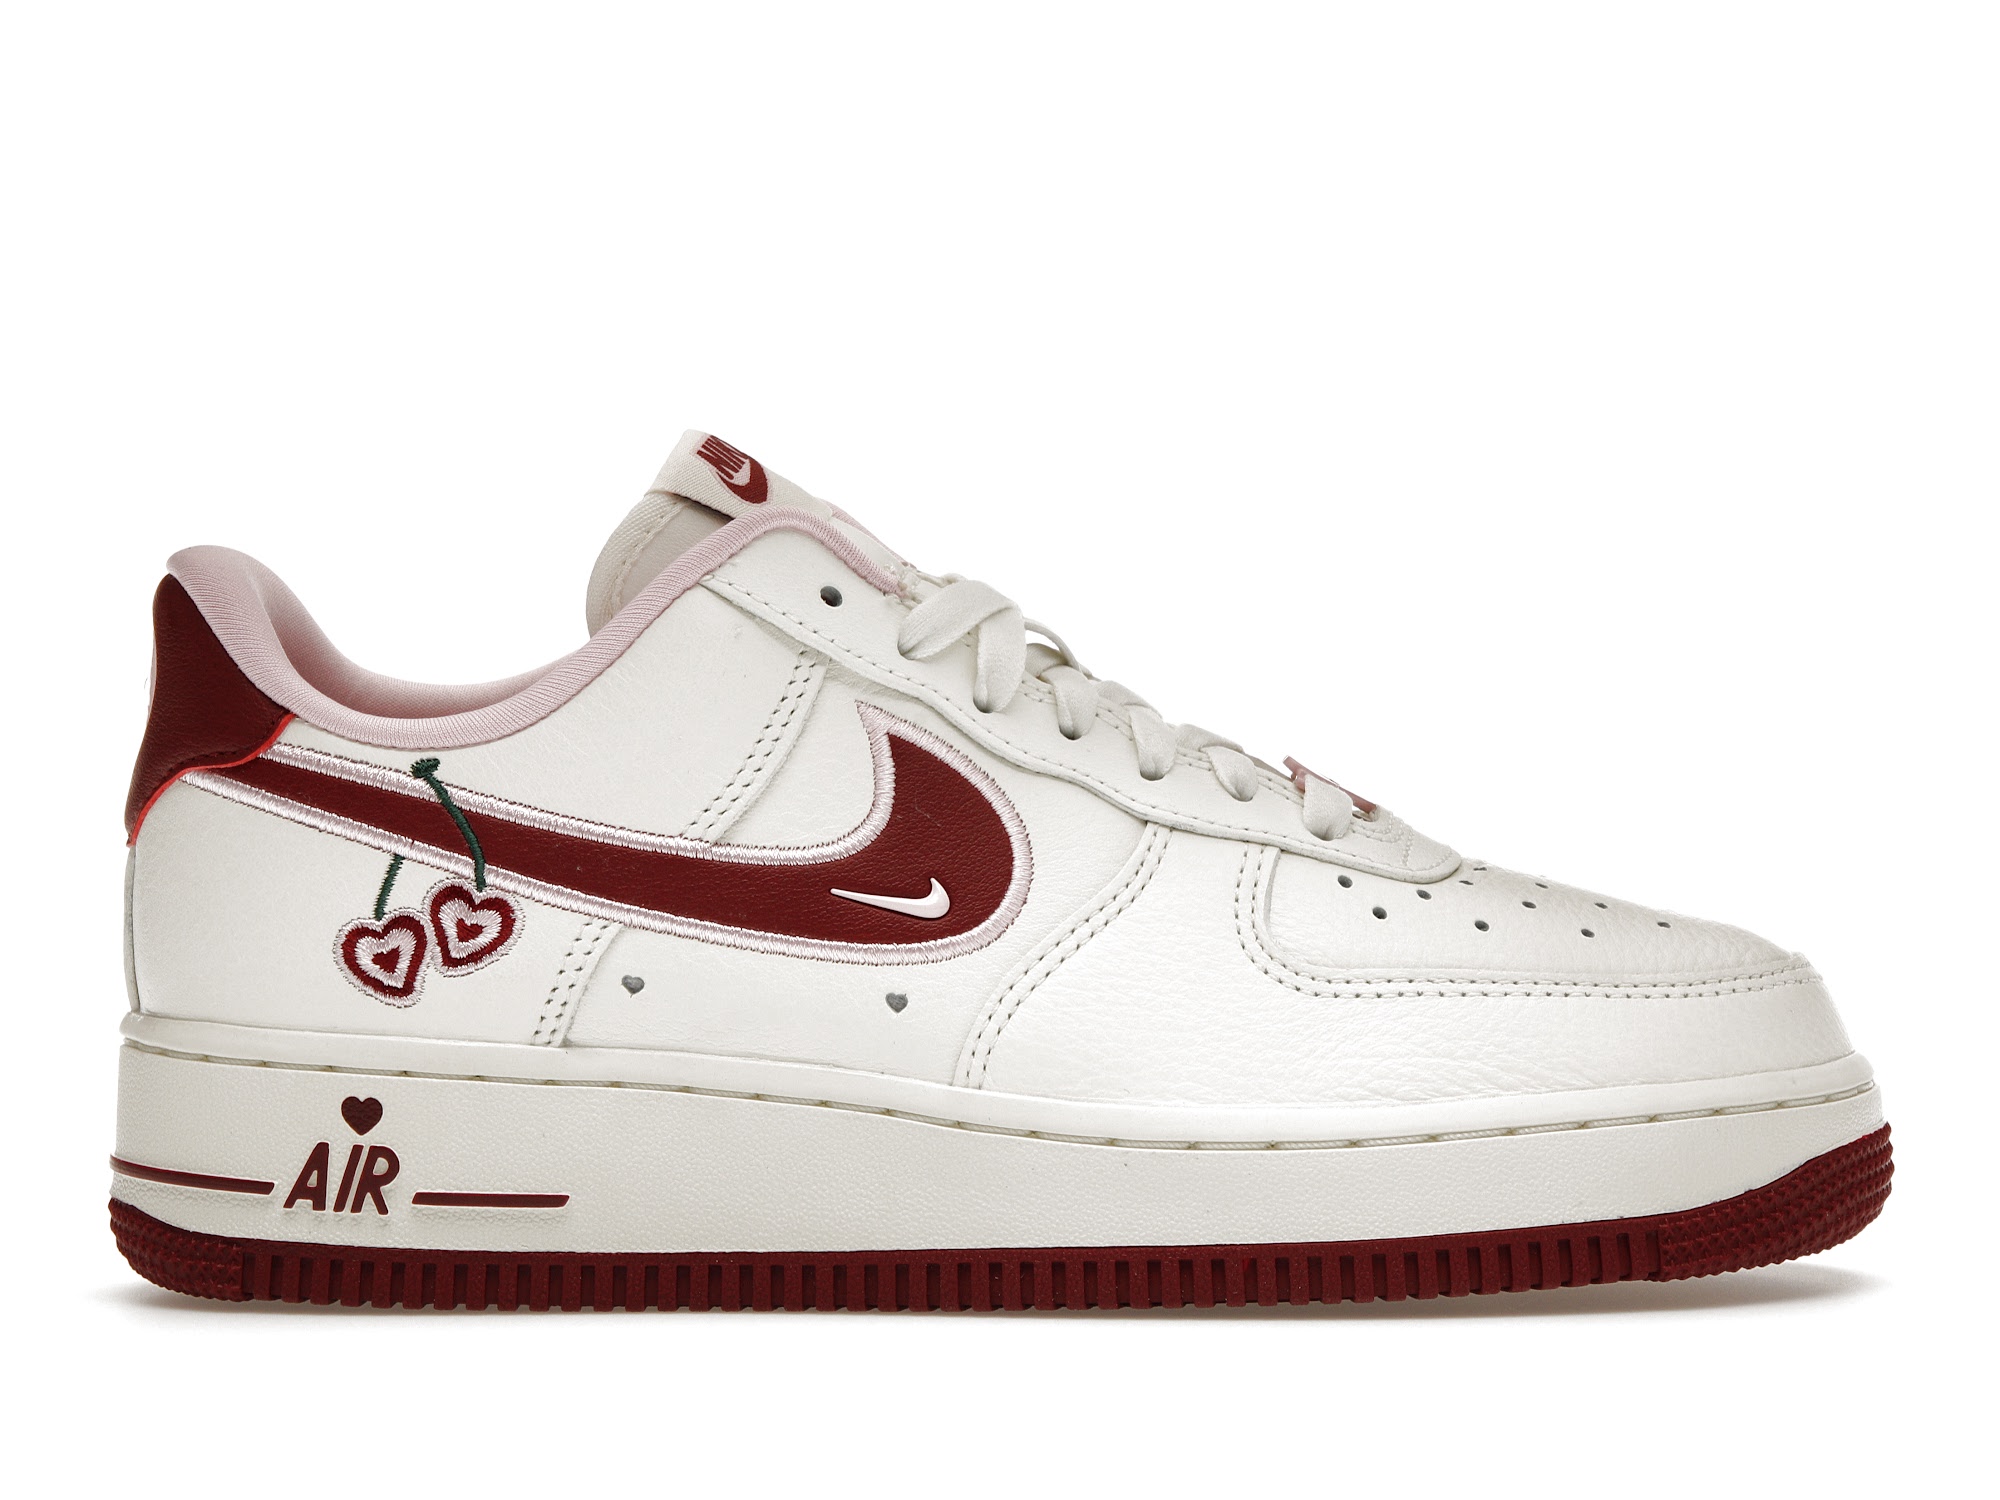 NIKE AIR FORCE 1 LOW “VALENTINE’S DAY”